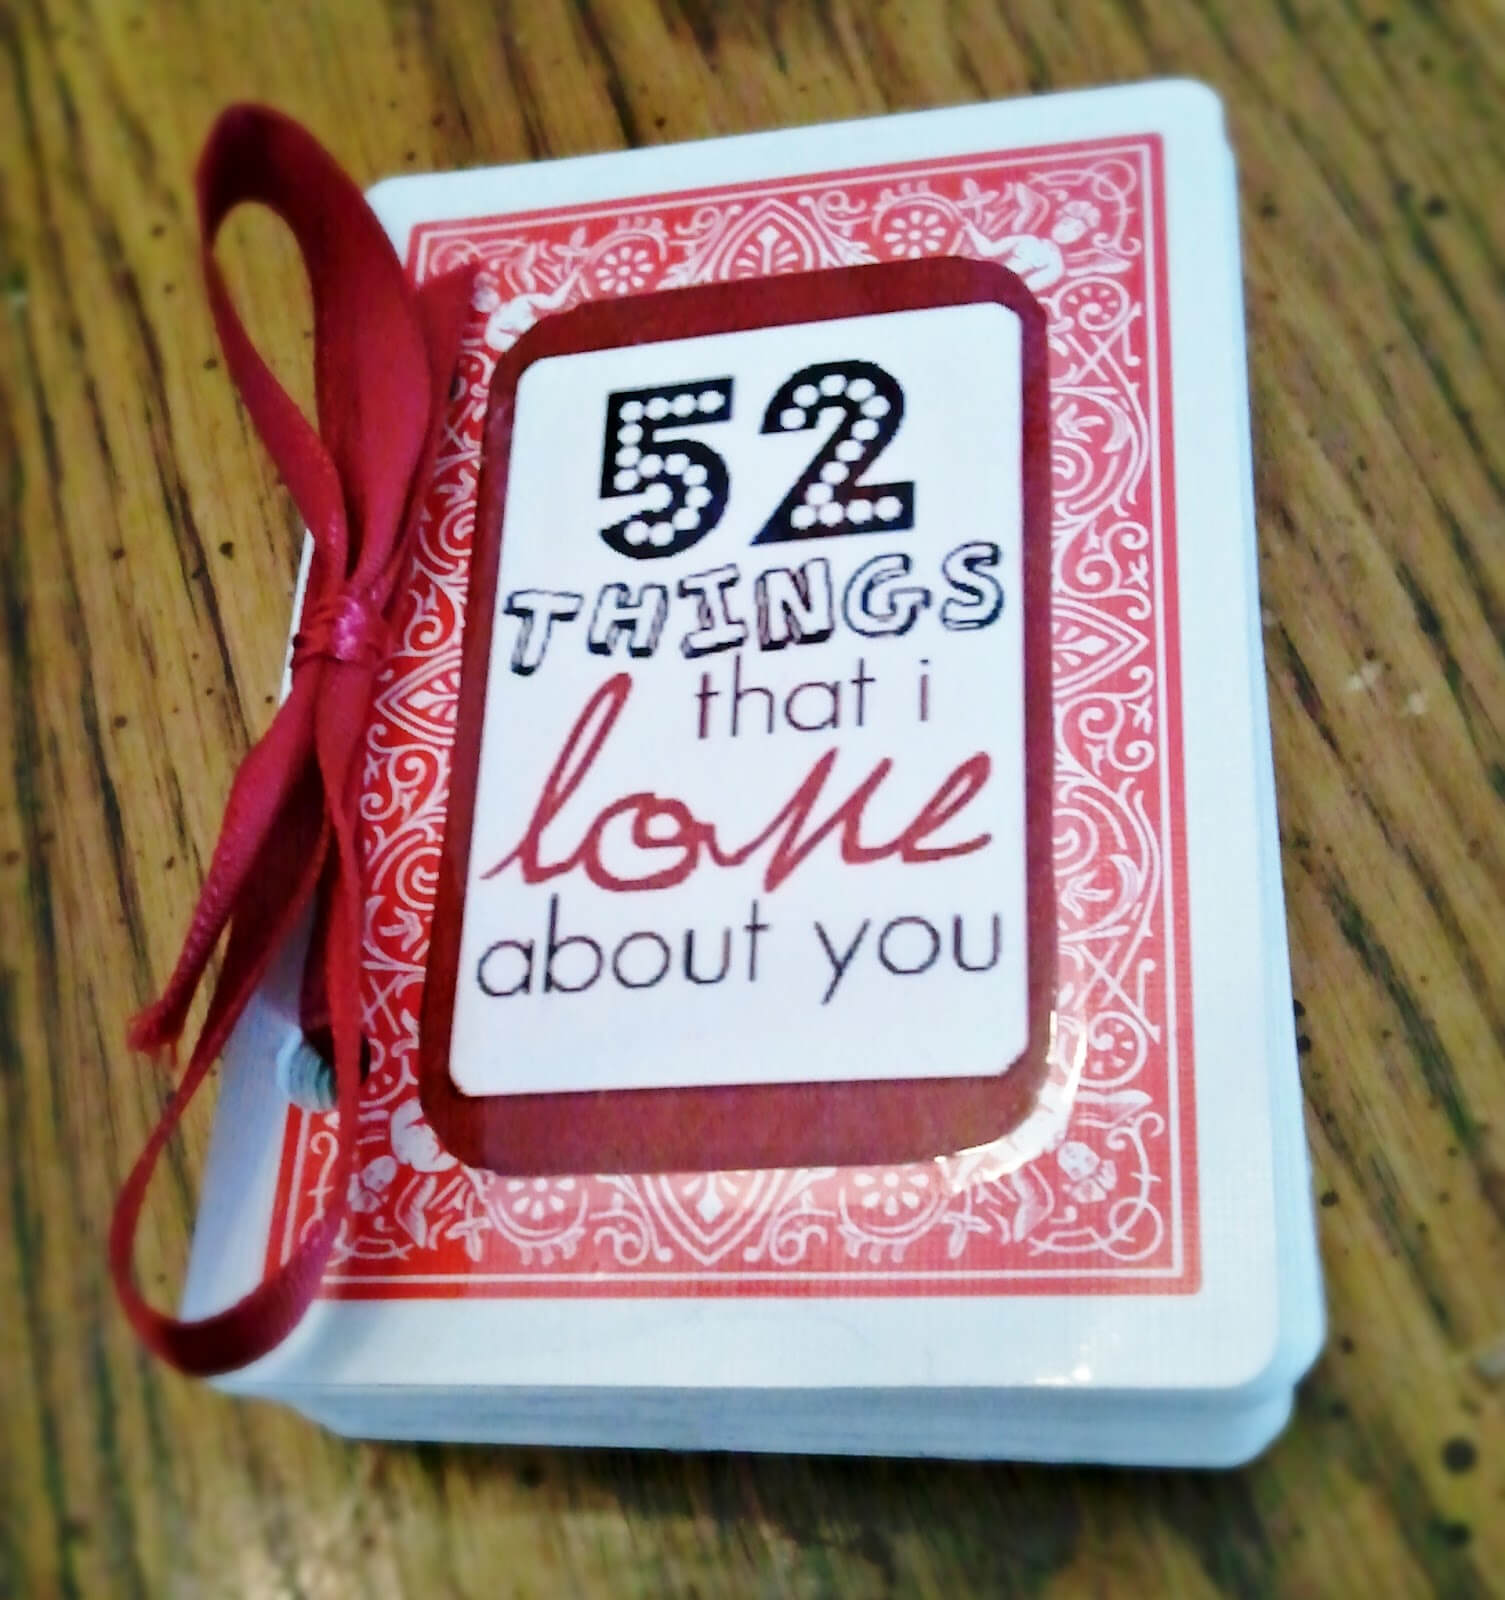 On A Cold Day: 52 Things I Love About You In 52 Things I Love About You Deck Of Cards Template